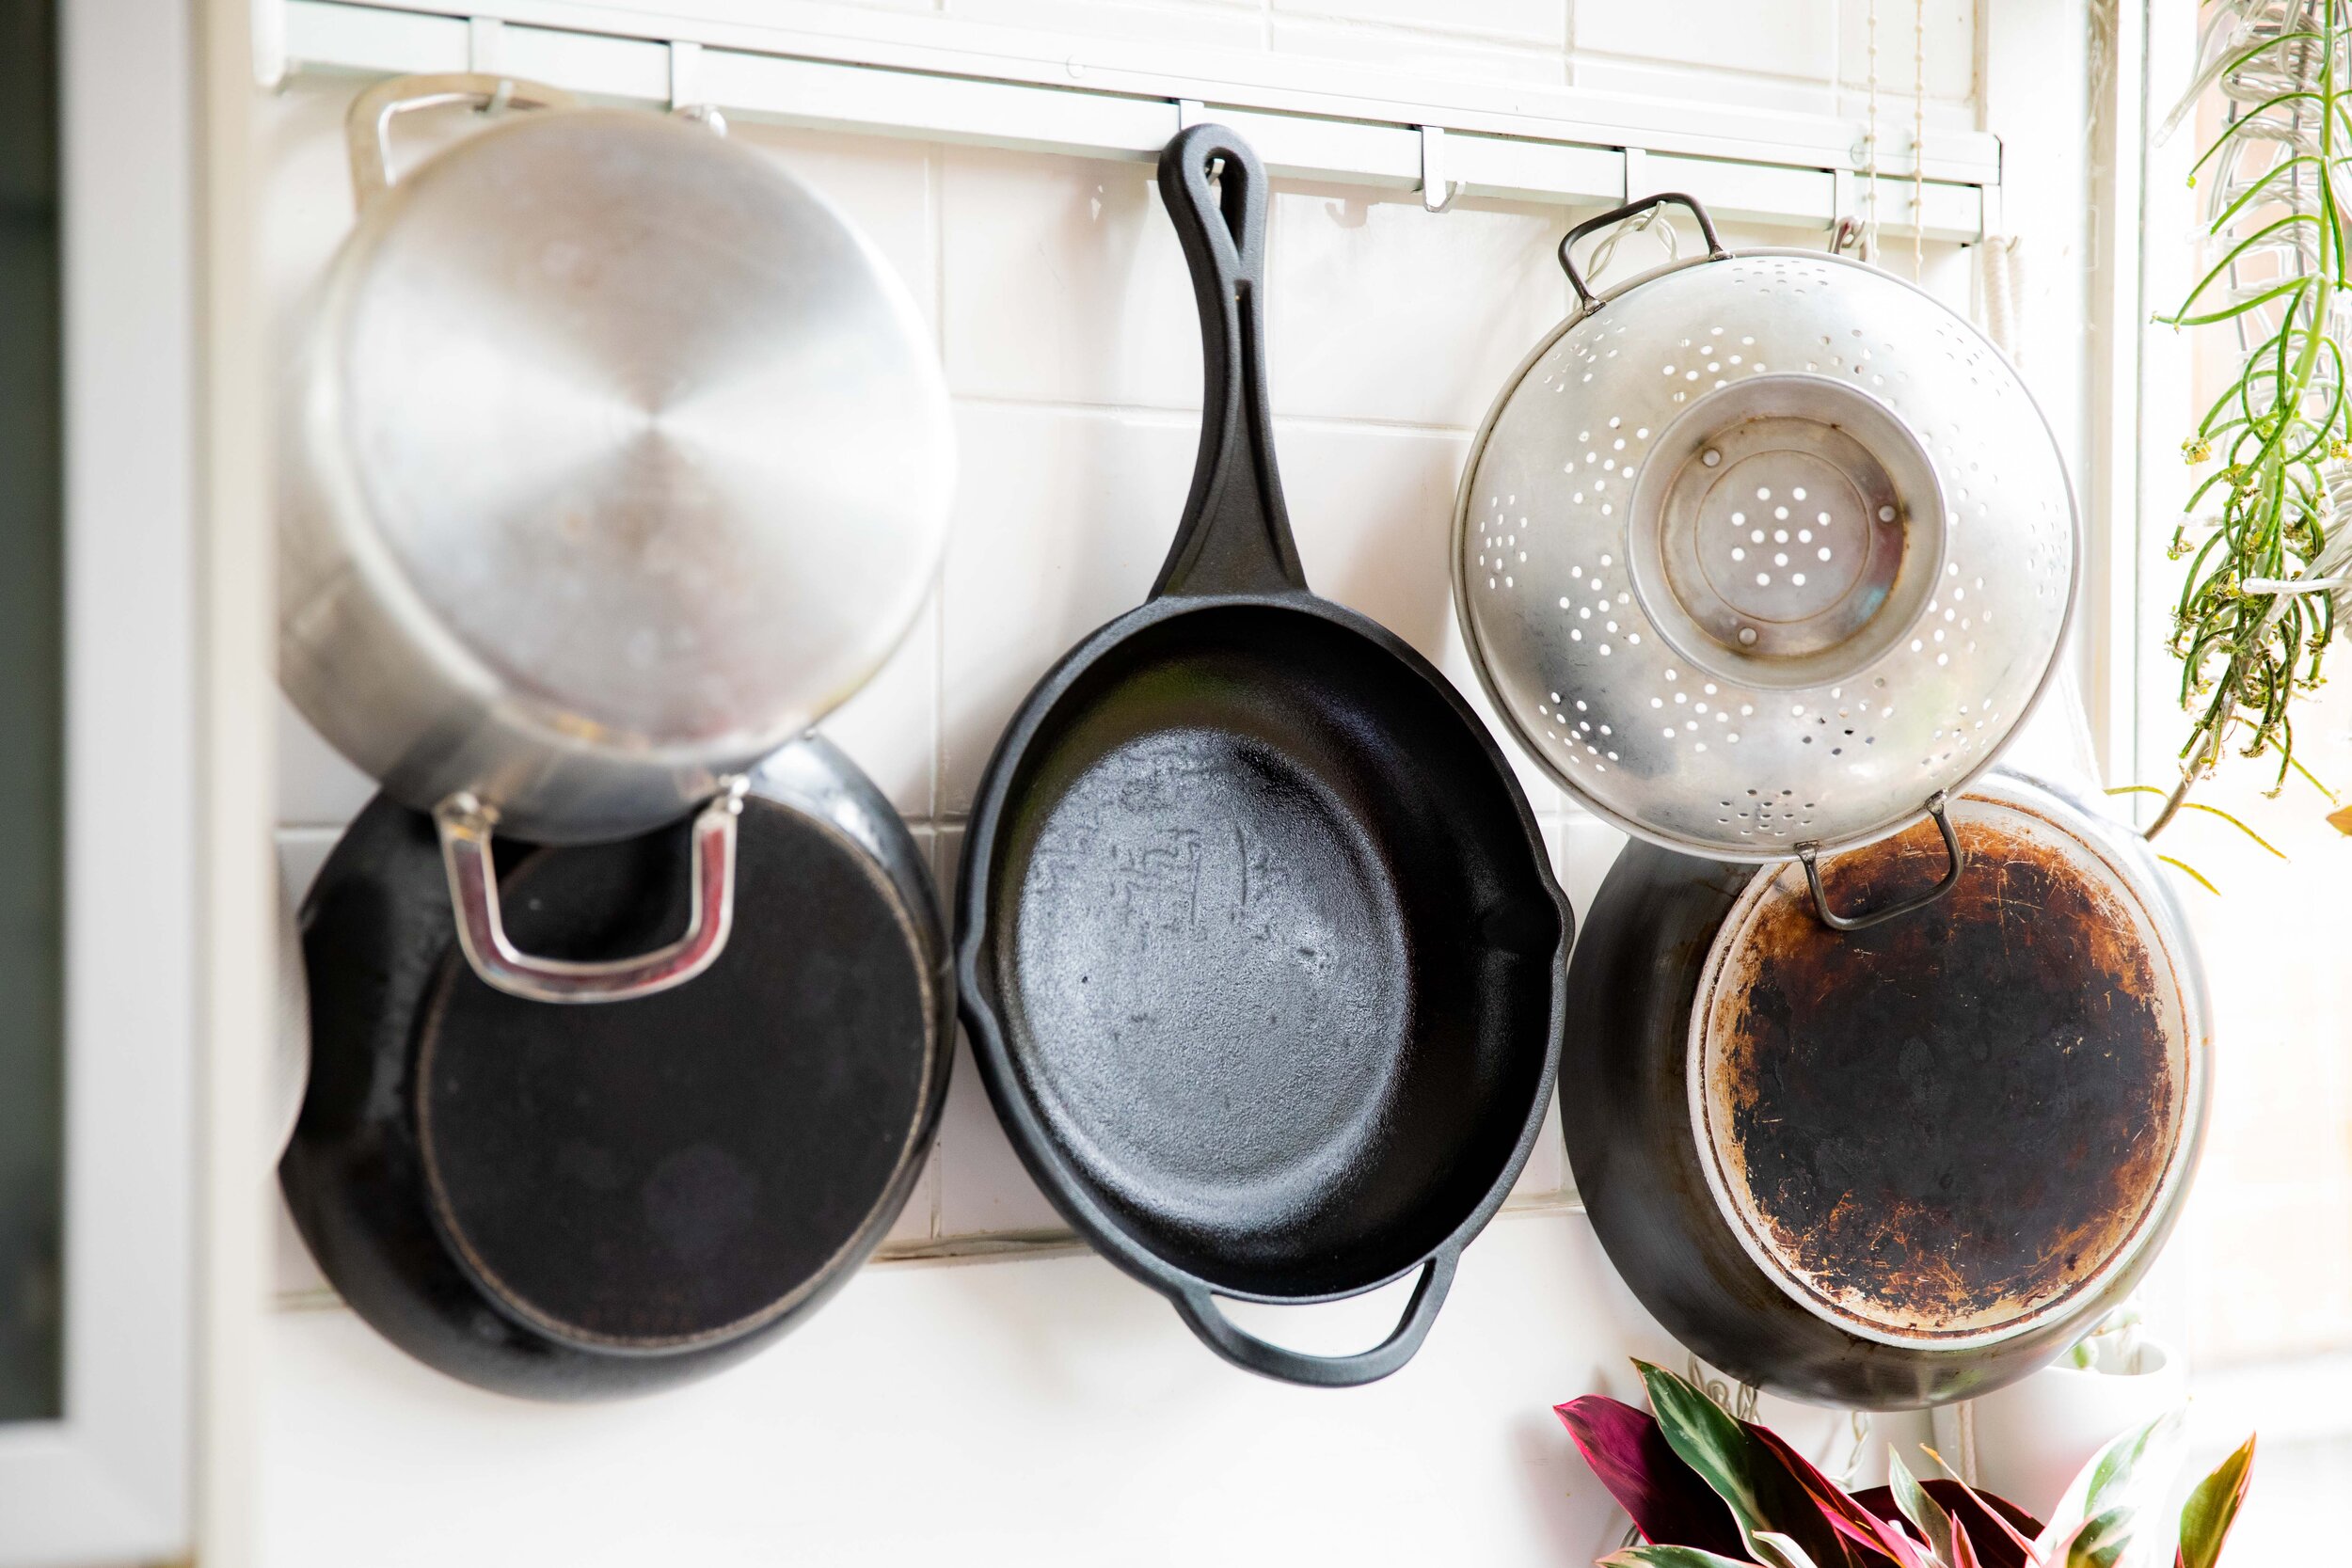 cookware - What should I look for in a cooking pan for Risotto? - Seasoned  Advice